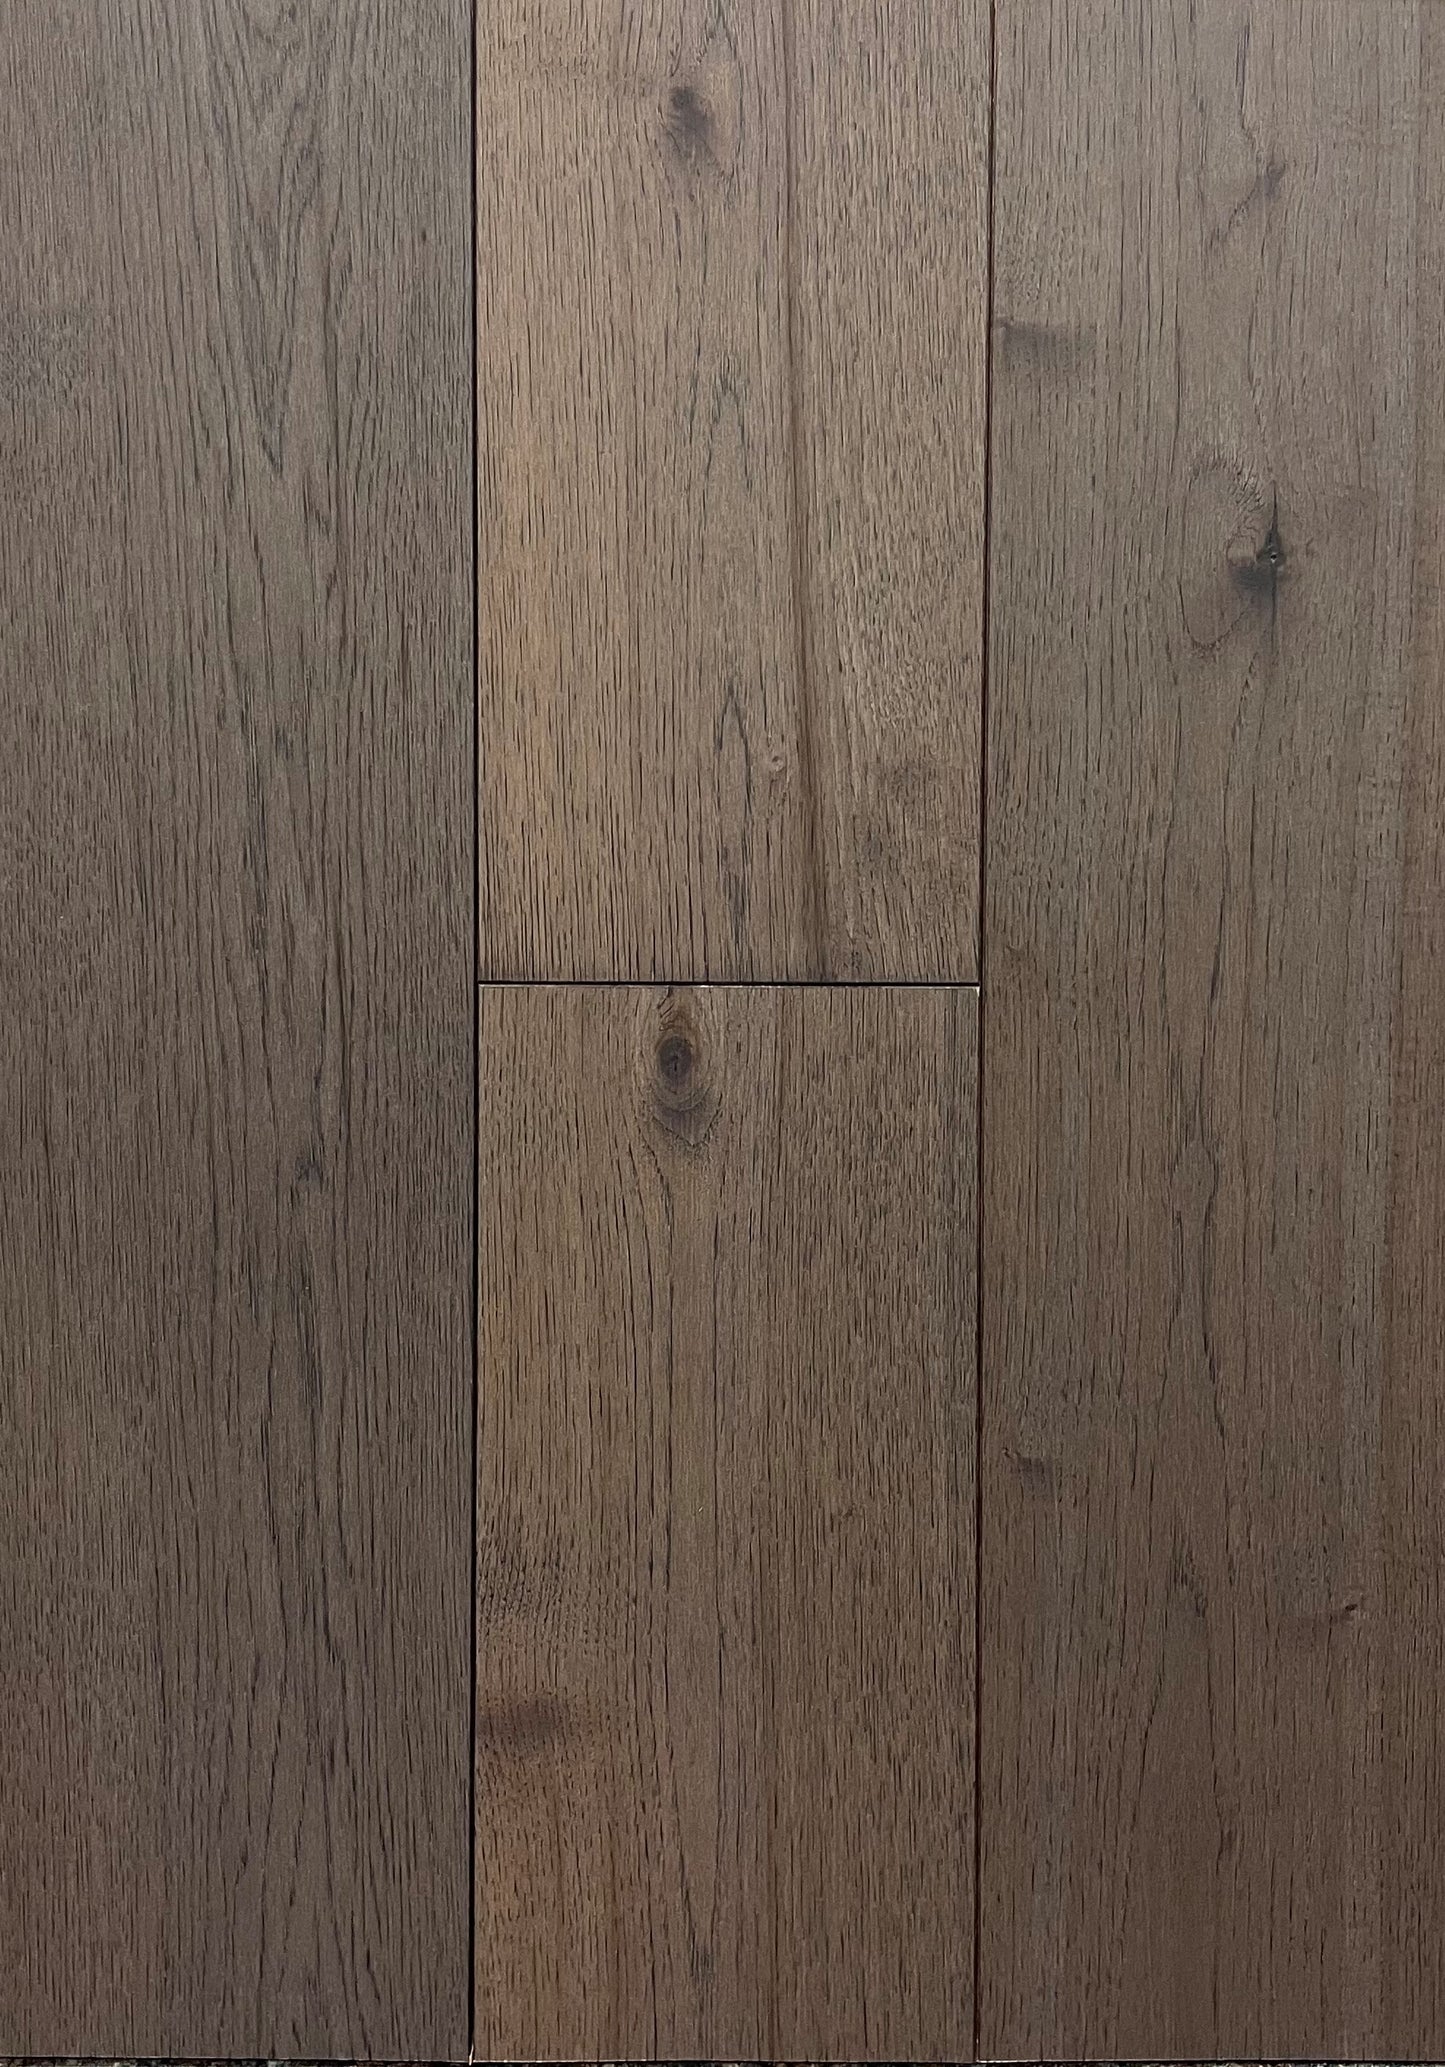 5" x 3/4" Solid Hickory Taupe Stain Prefinished Hardwood Flooring